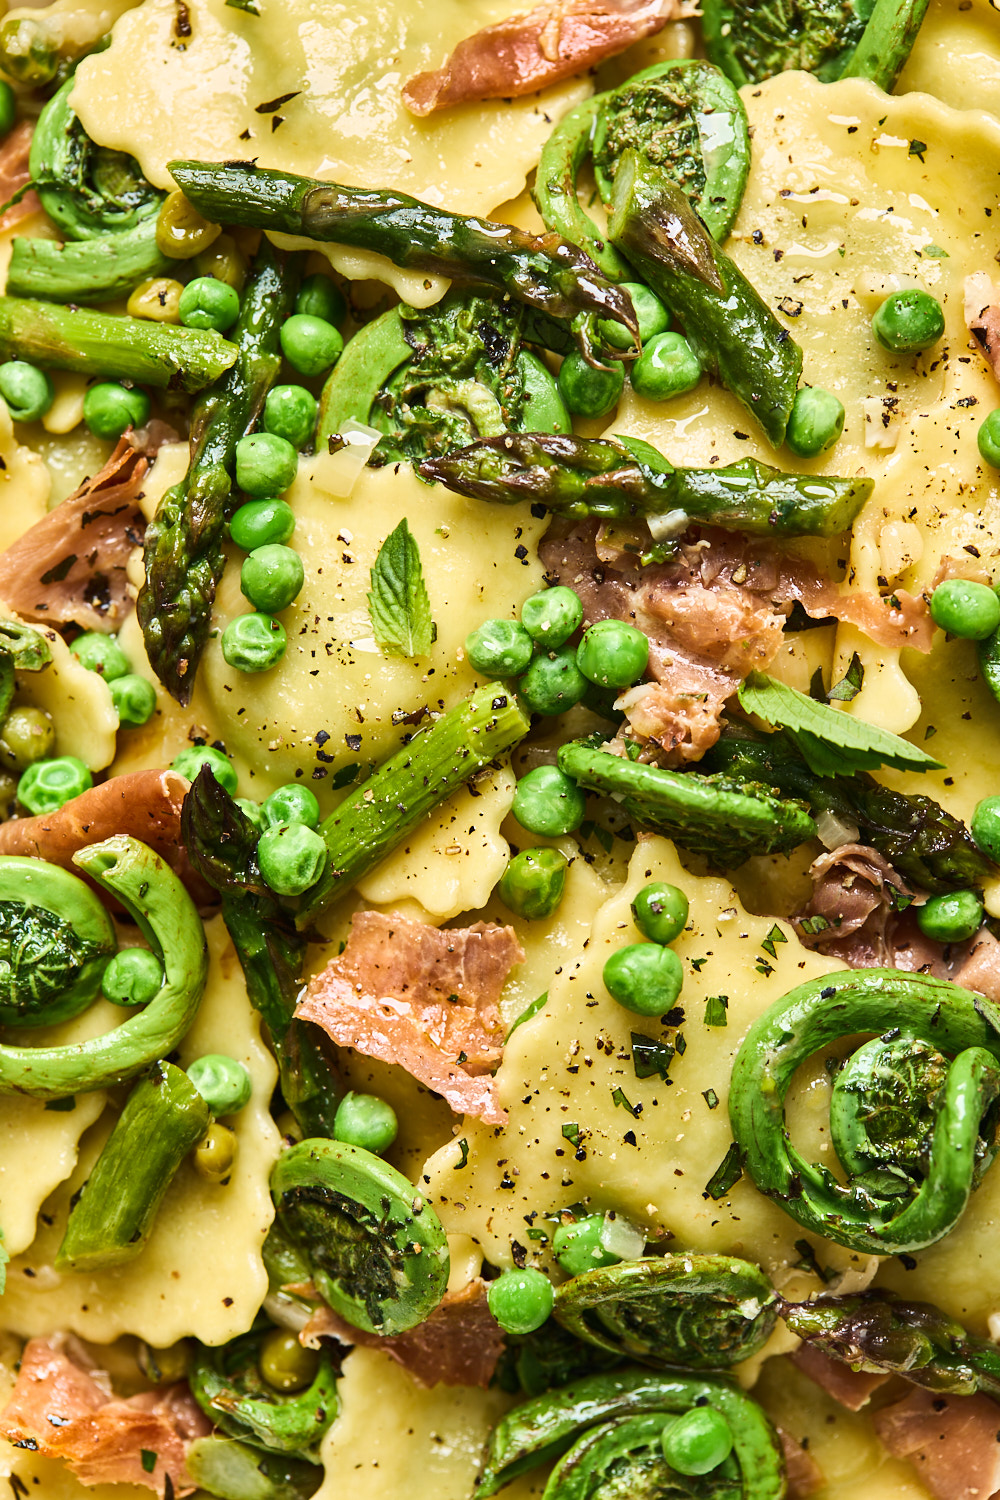 Lemon Butter Ravioli With Roasted Asparagus and Peas